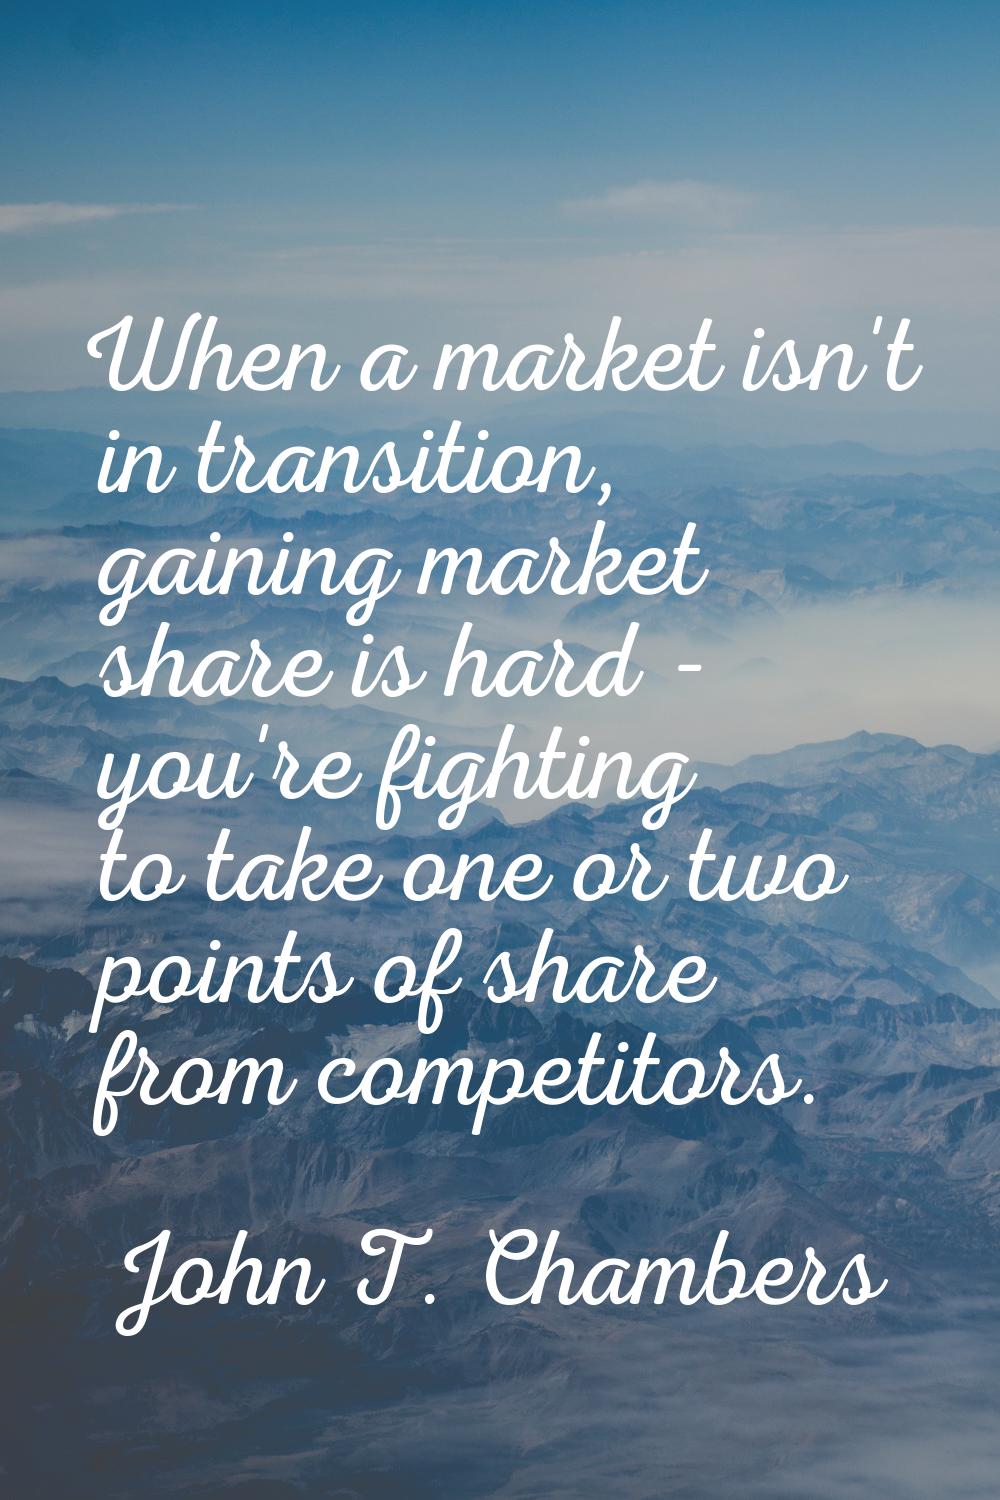 When a market isn't in transition, gaining market share is hard - you're fighting to take one or tw